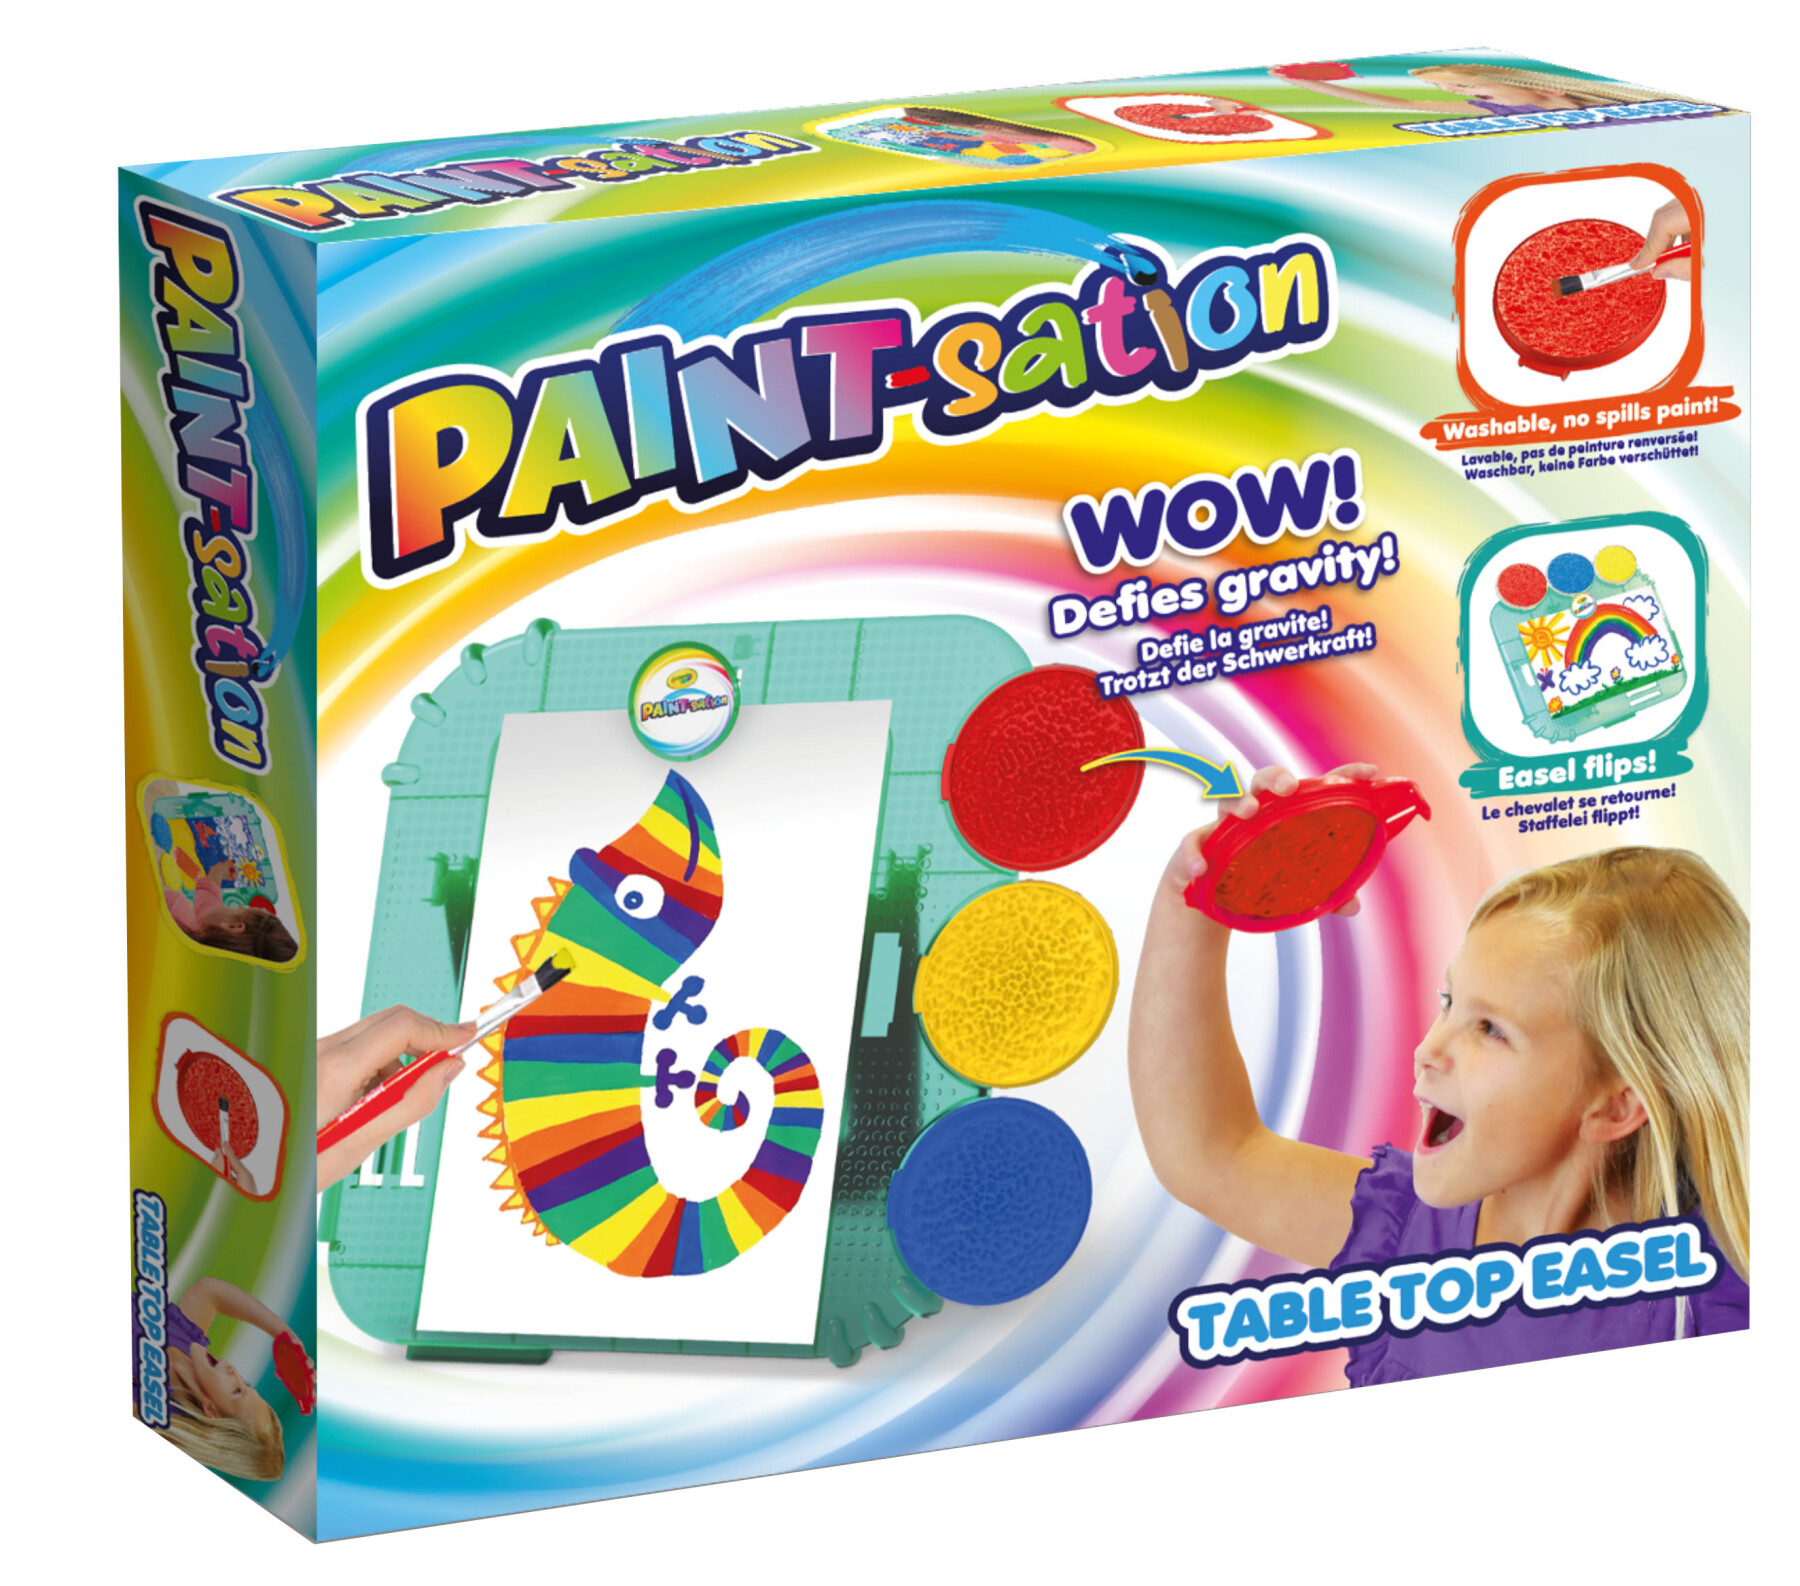 Paint sation - table top easel - cavalletto - 